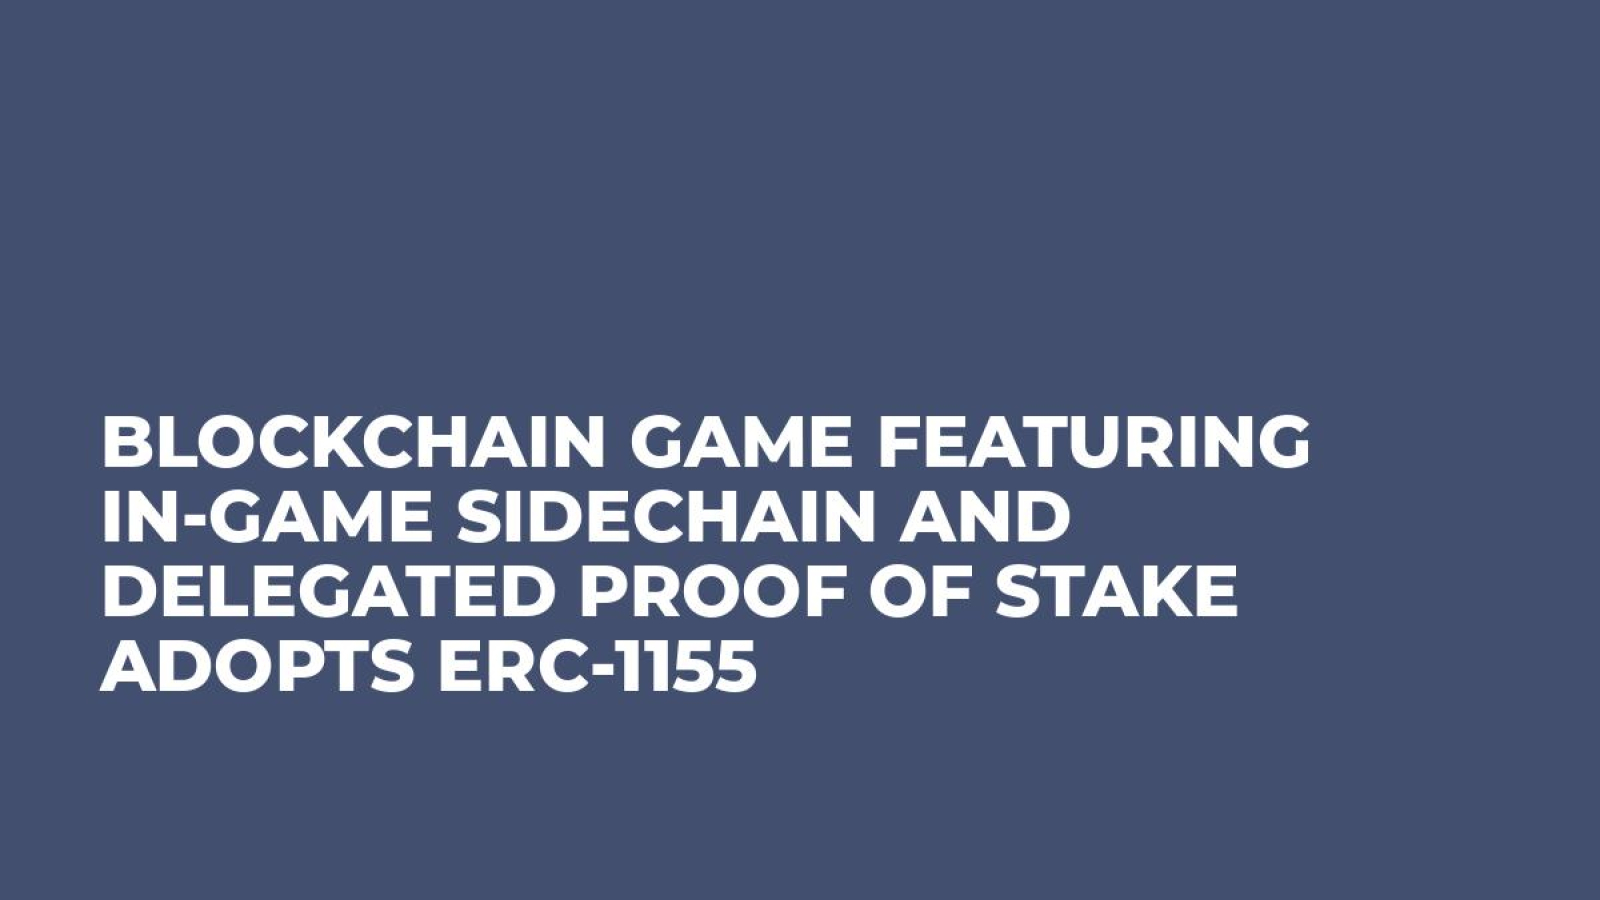 Blockchain Game Featuring In-Game Sidechain and Delegated Proof of Stake Adopts ERC-1155